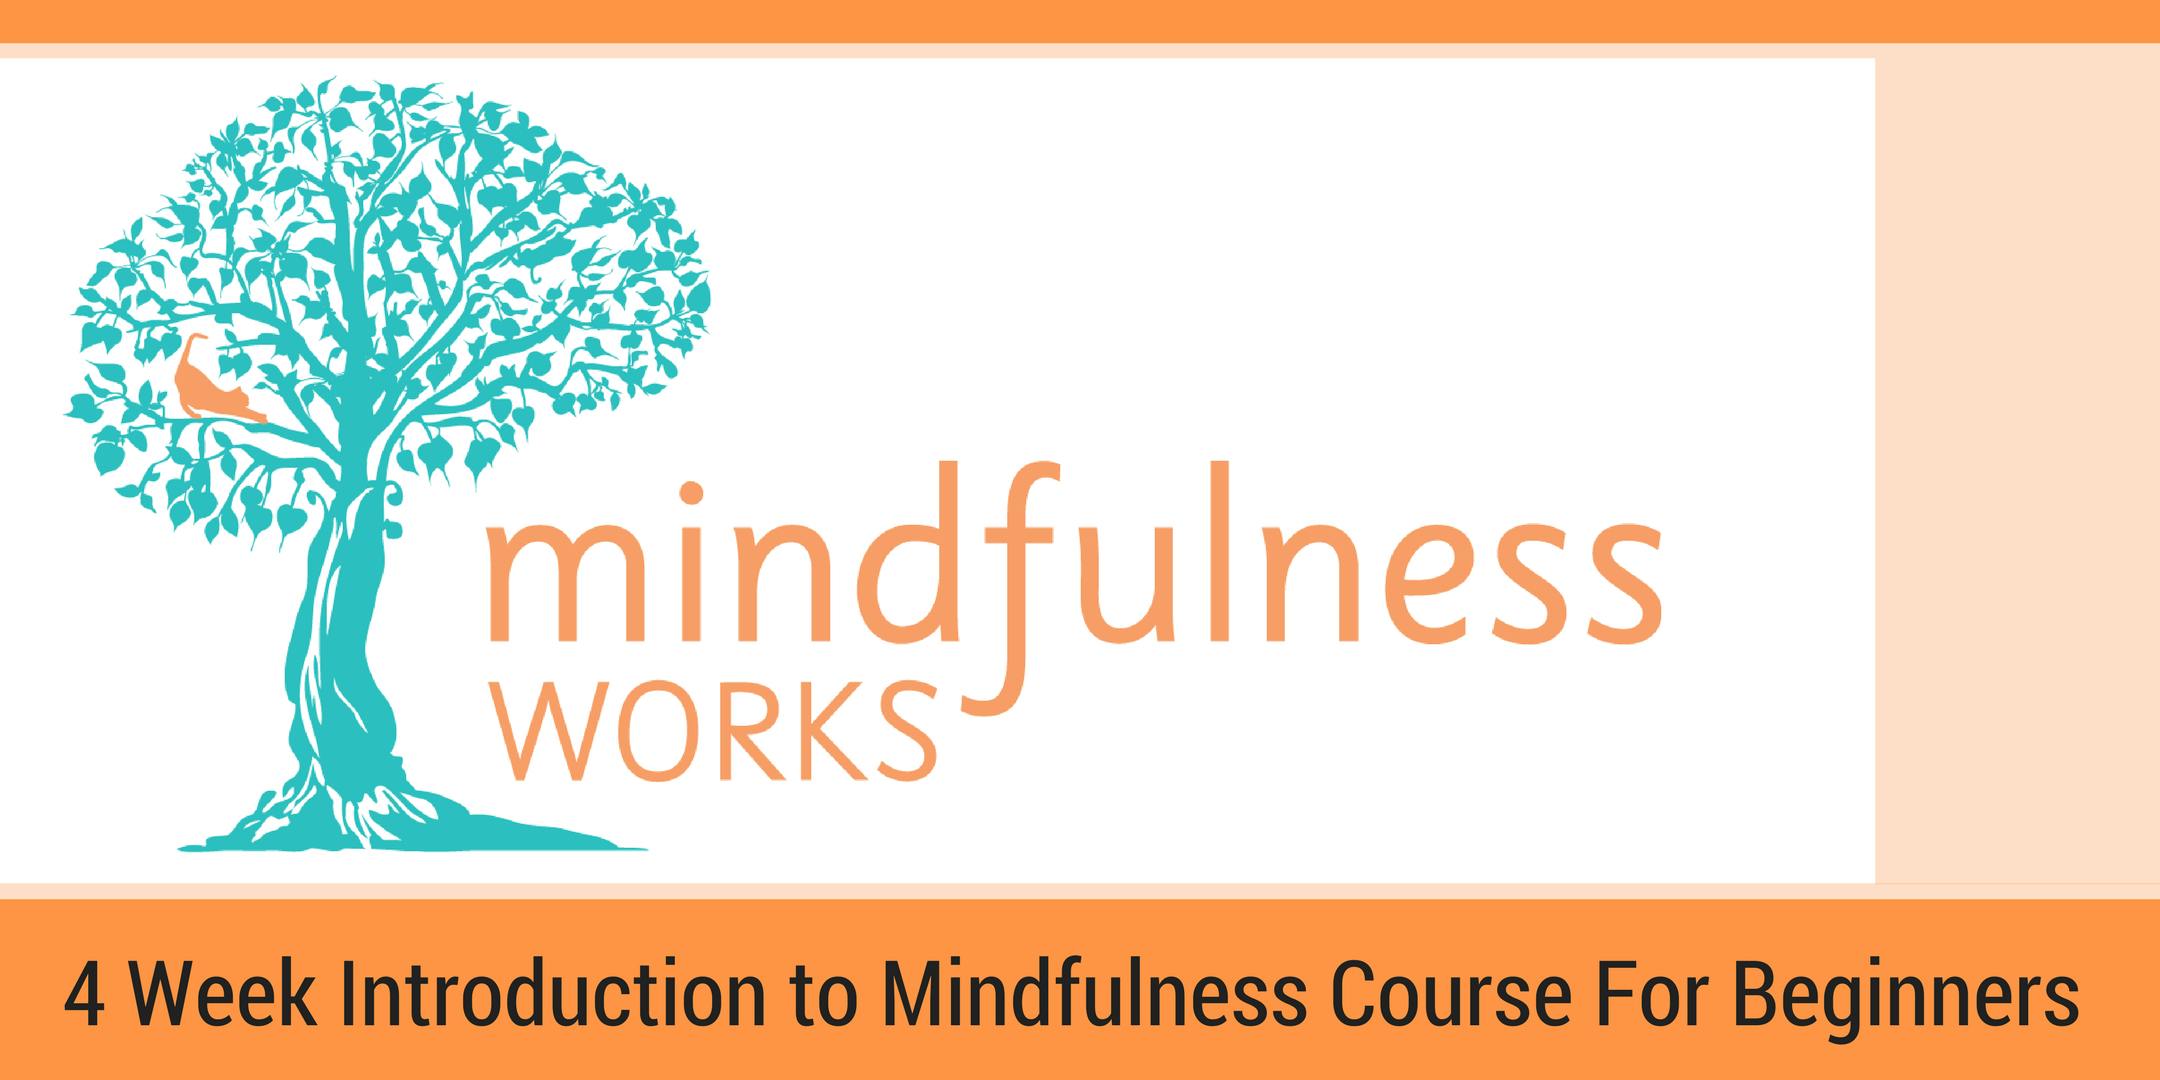 Eltham – An Introduction to Mindfulness & Meditation 4 Week Course